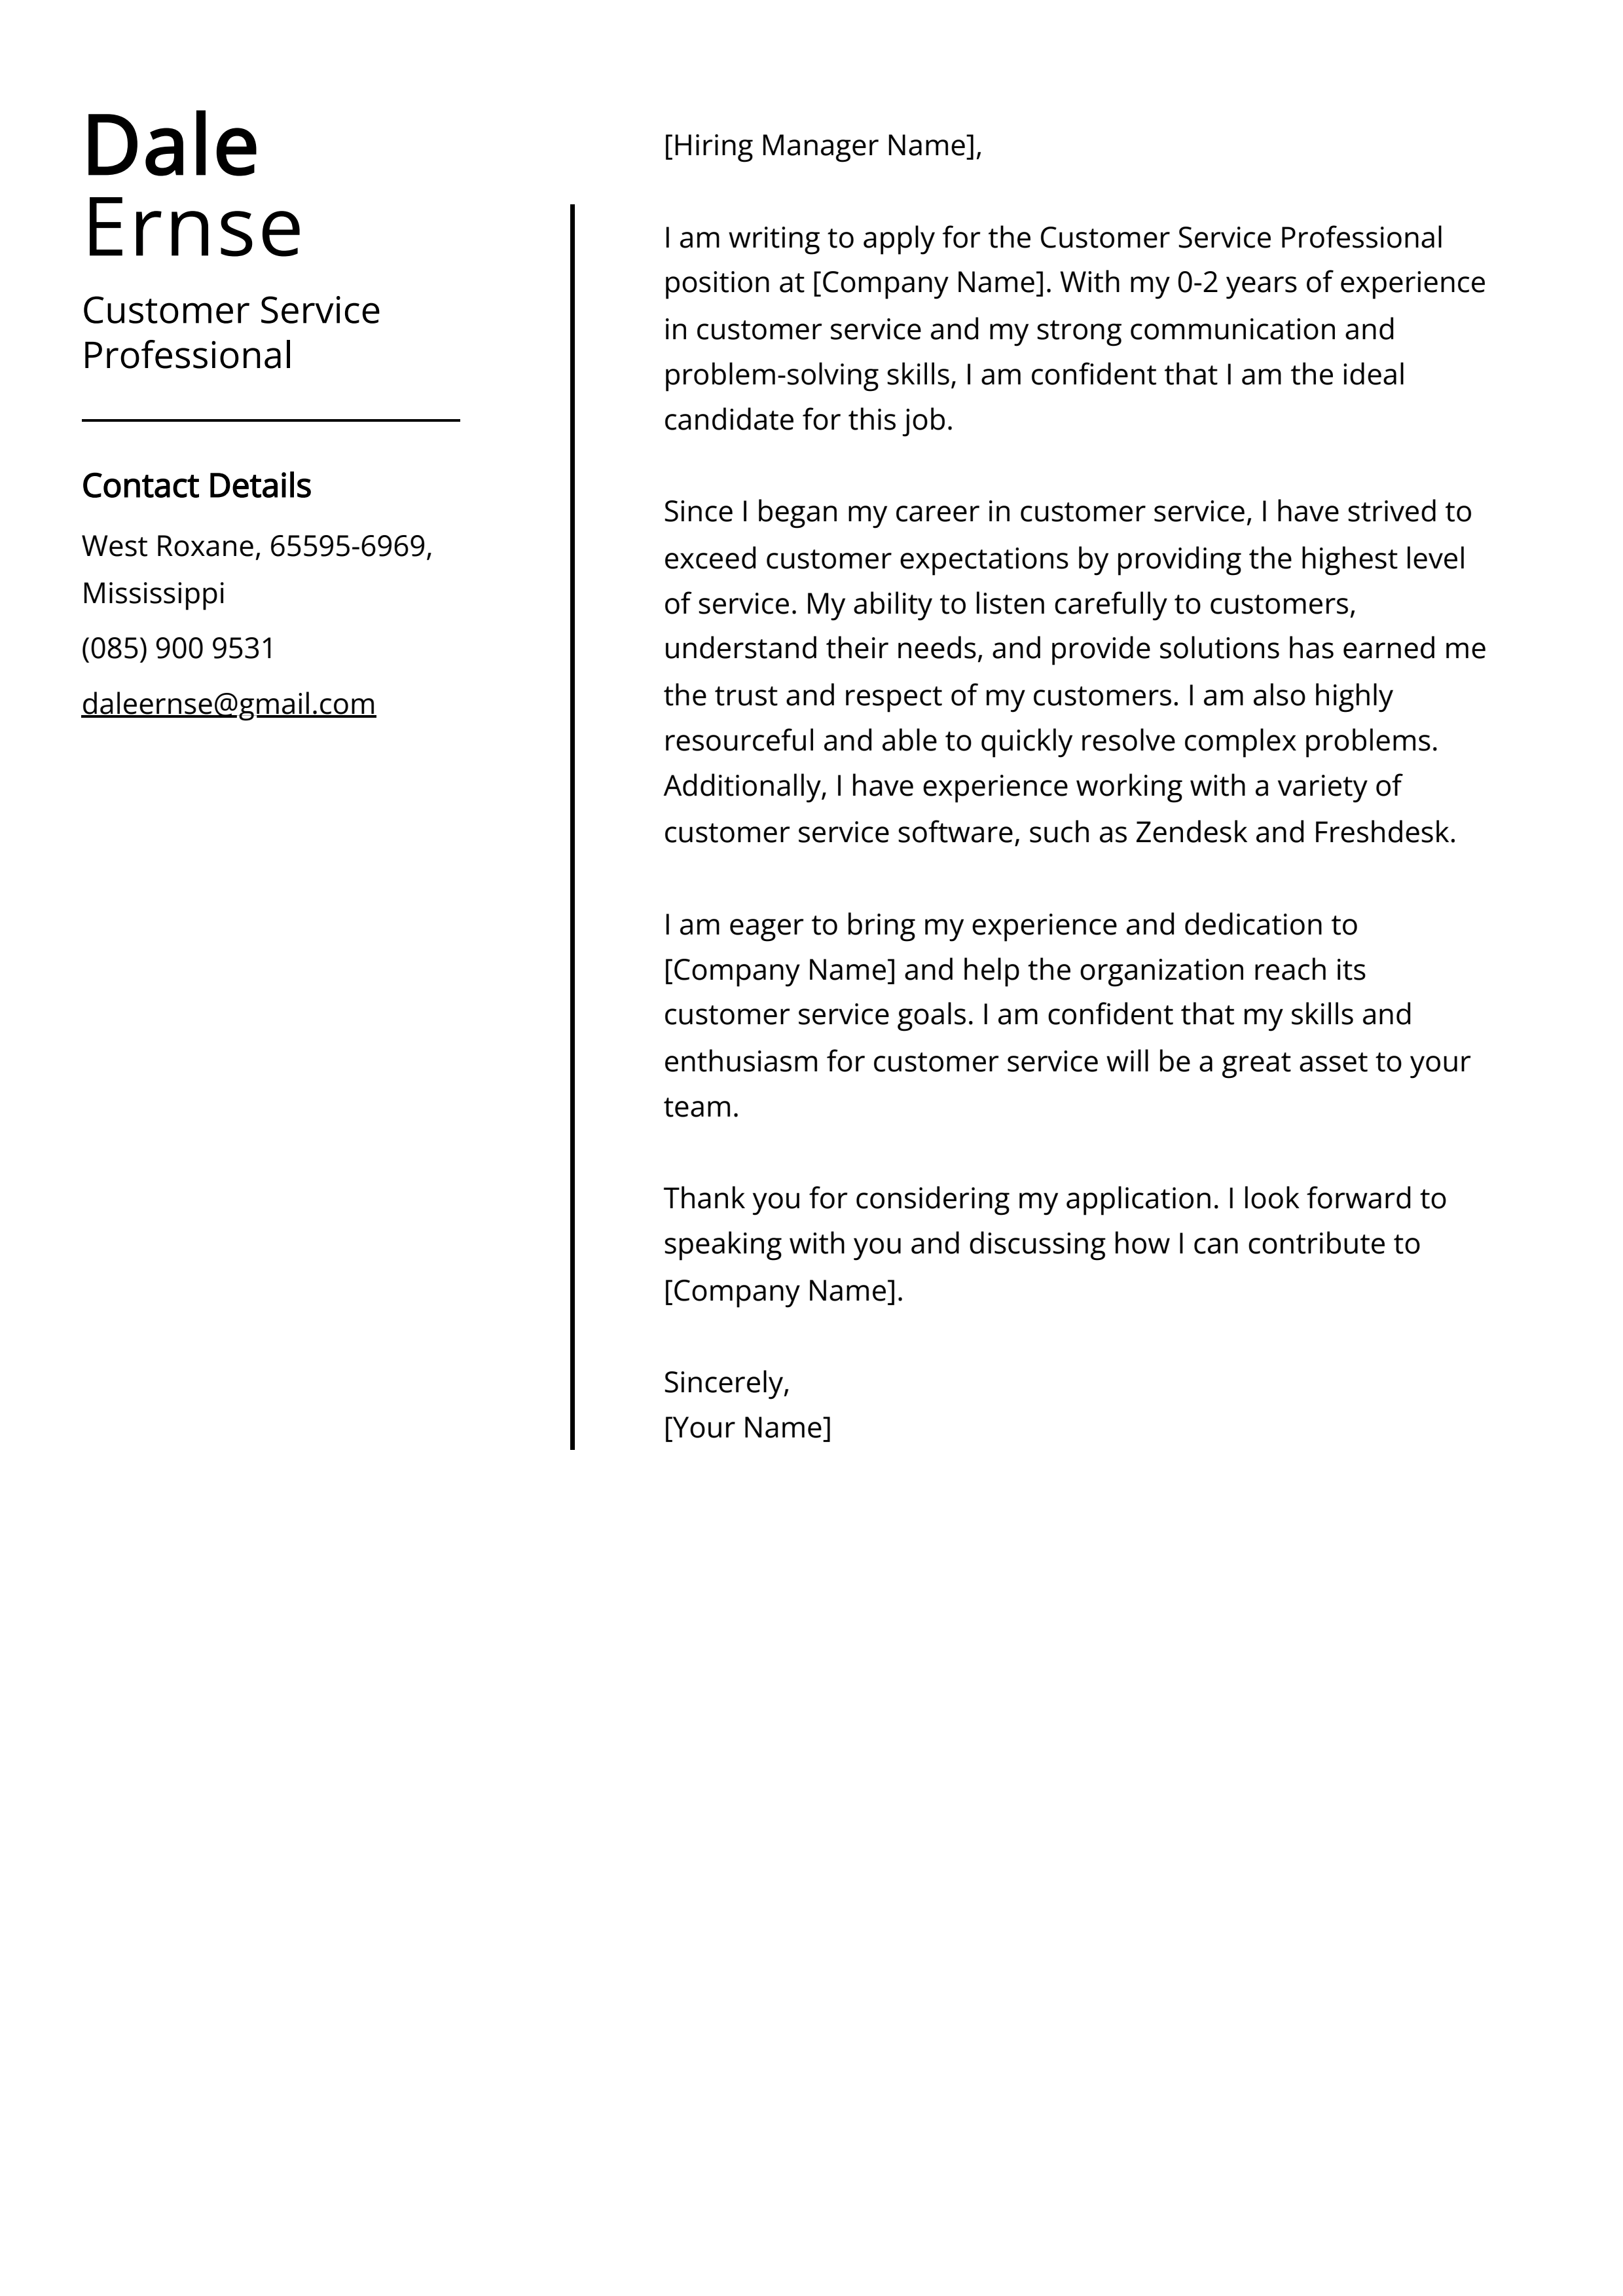 Customer Service Professional Cover Letter Example